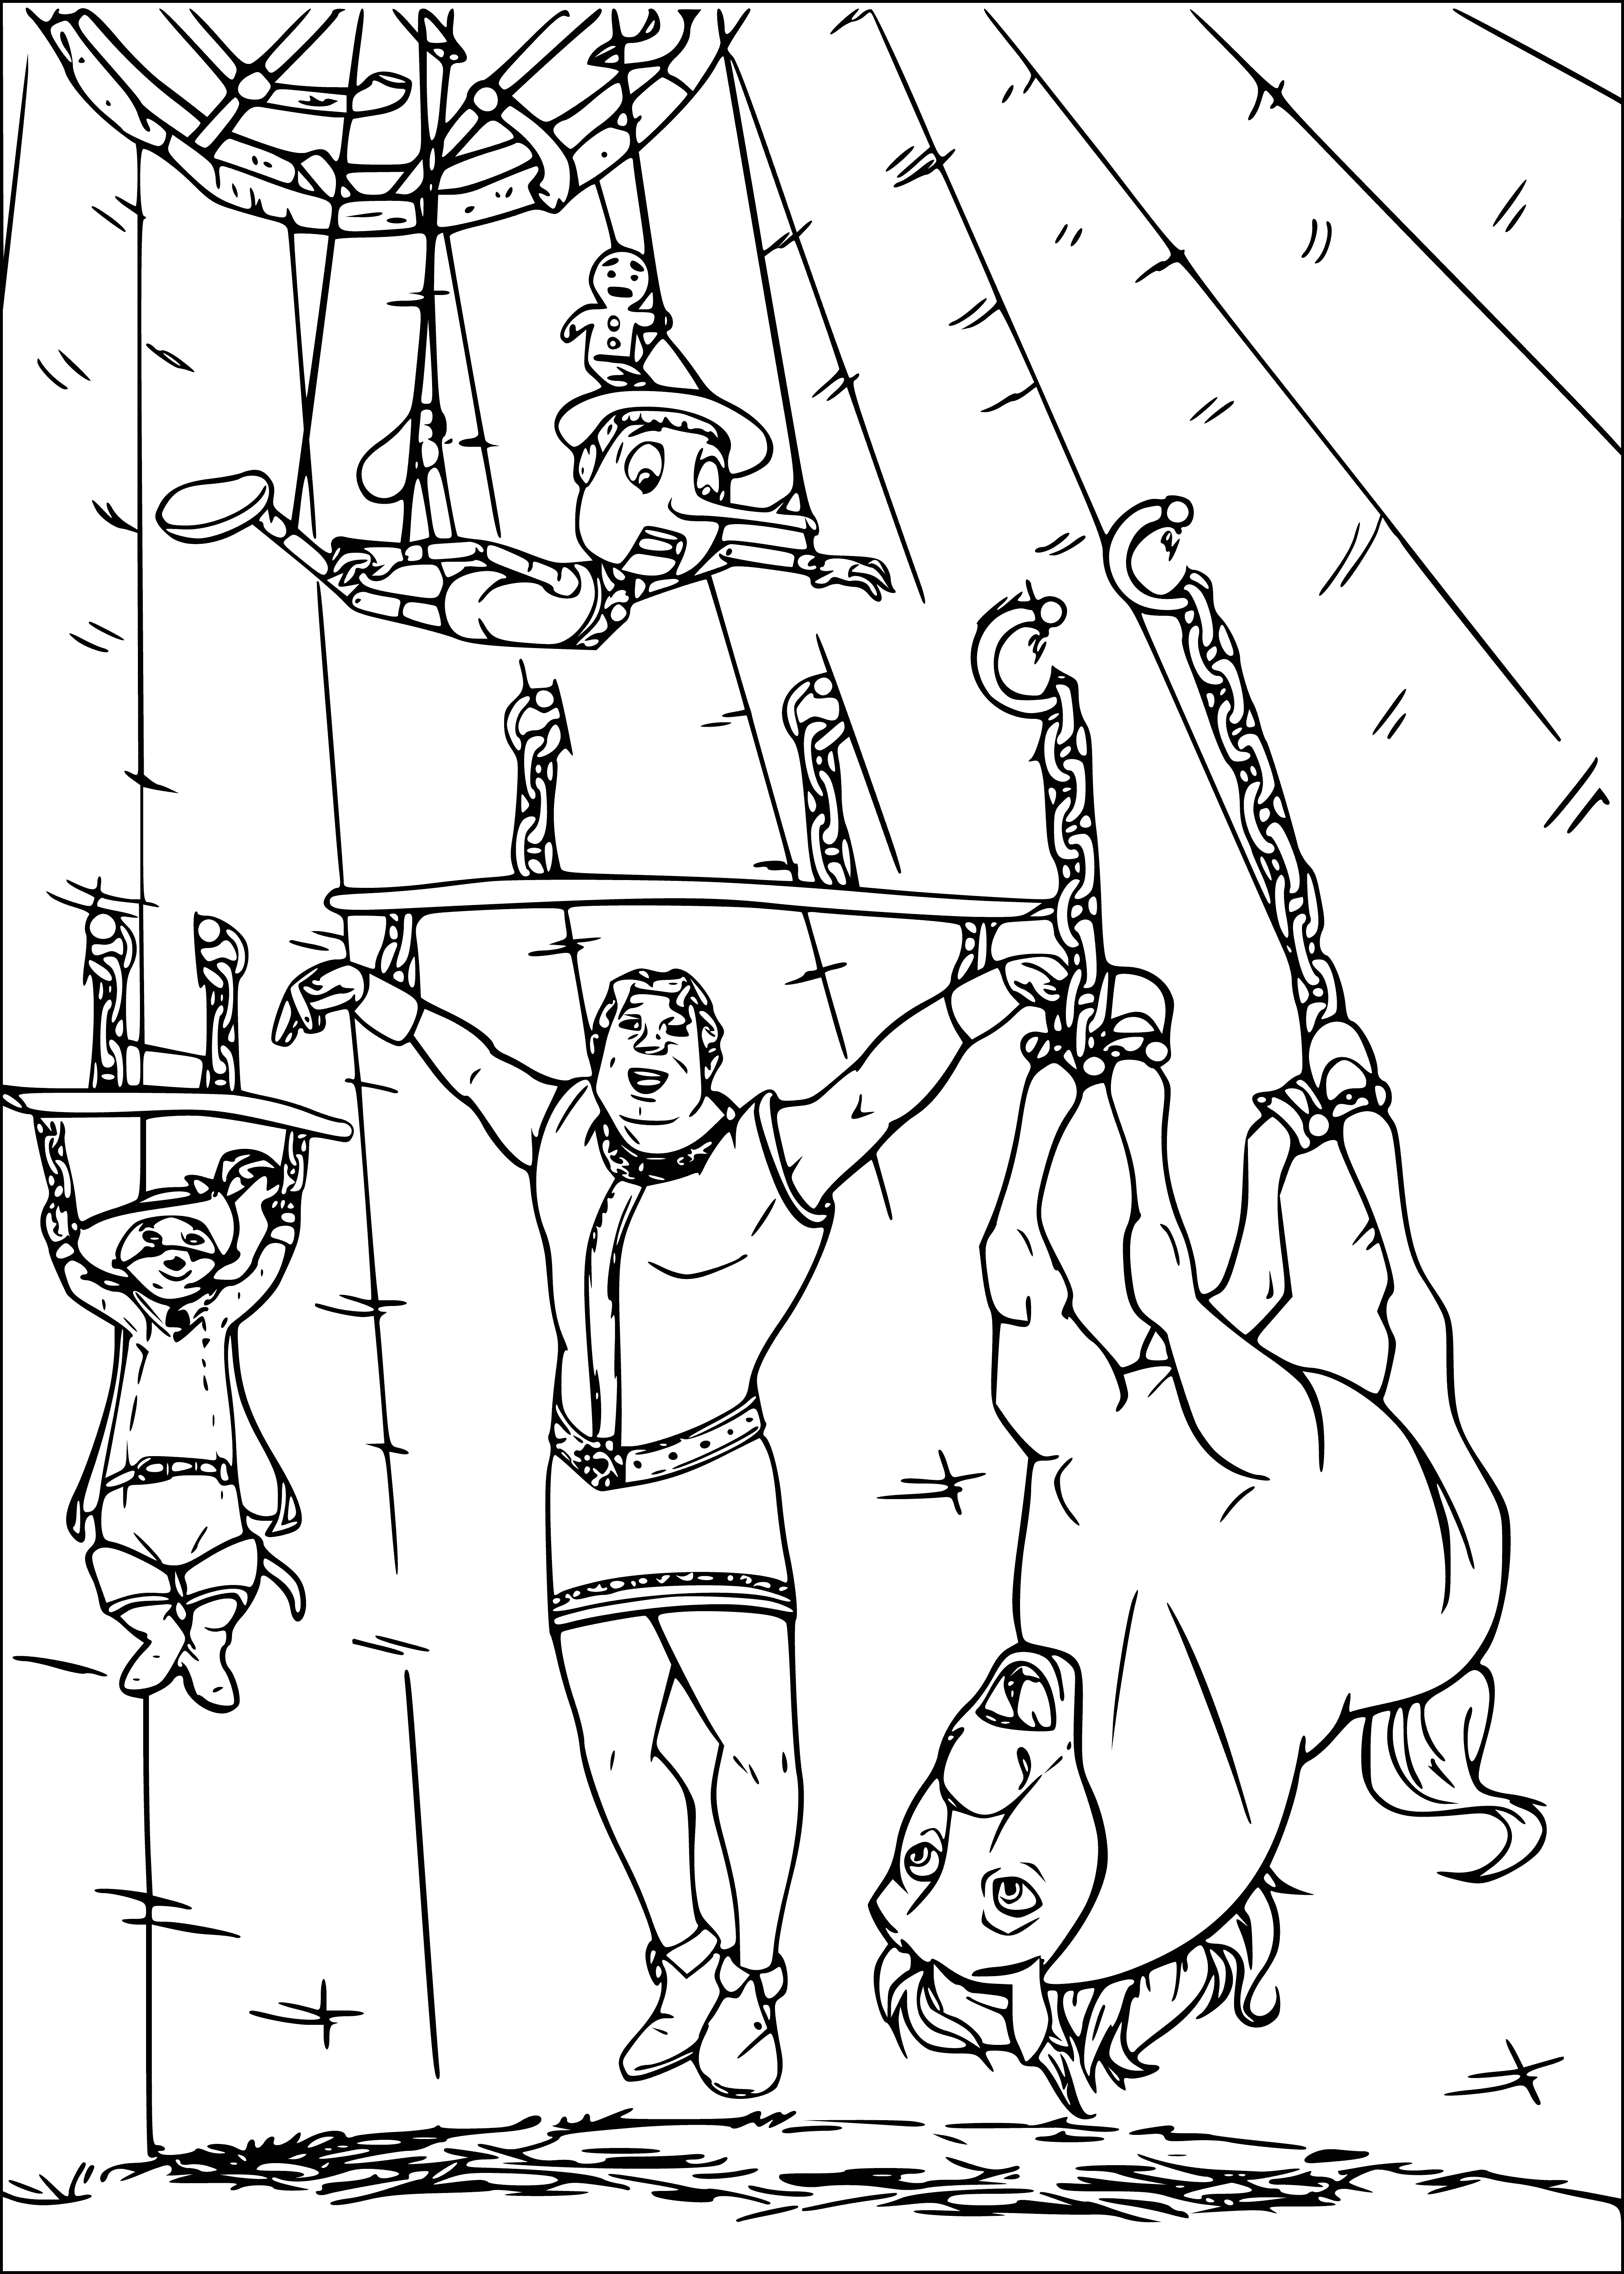 coloring page: Shrek stands in a dungeon illuminated by a single ray of light from a distant window.